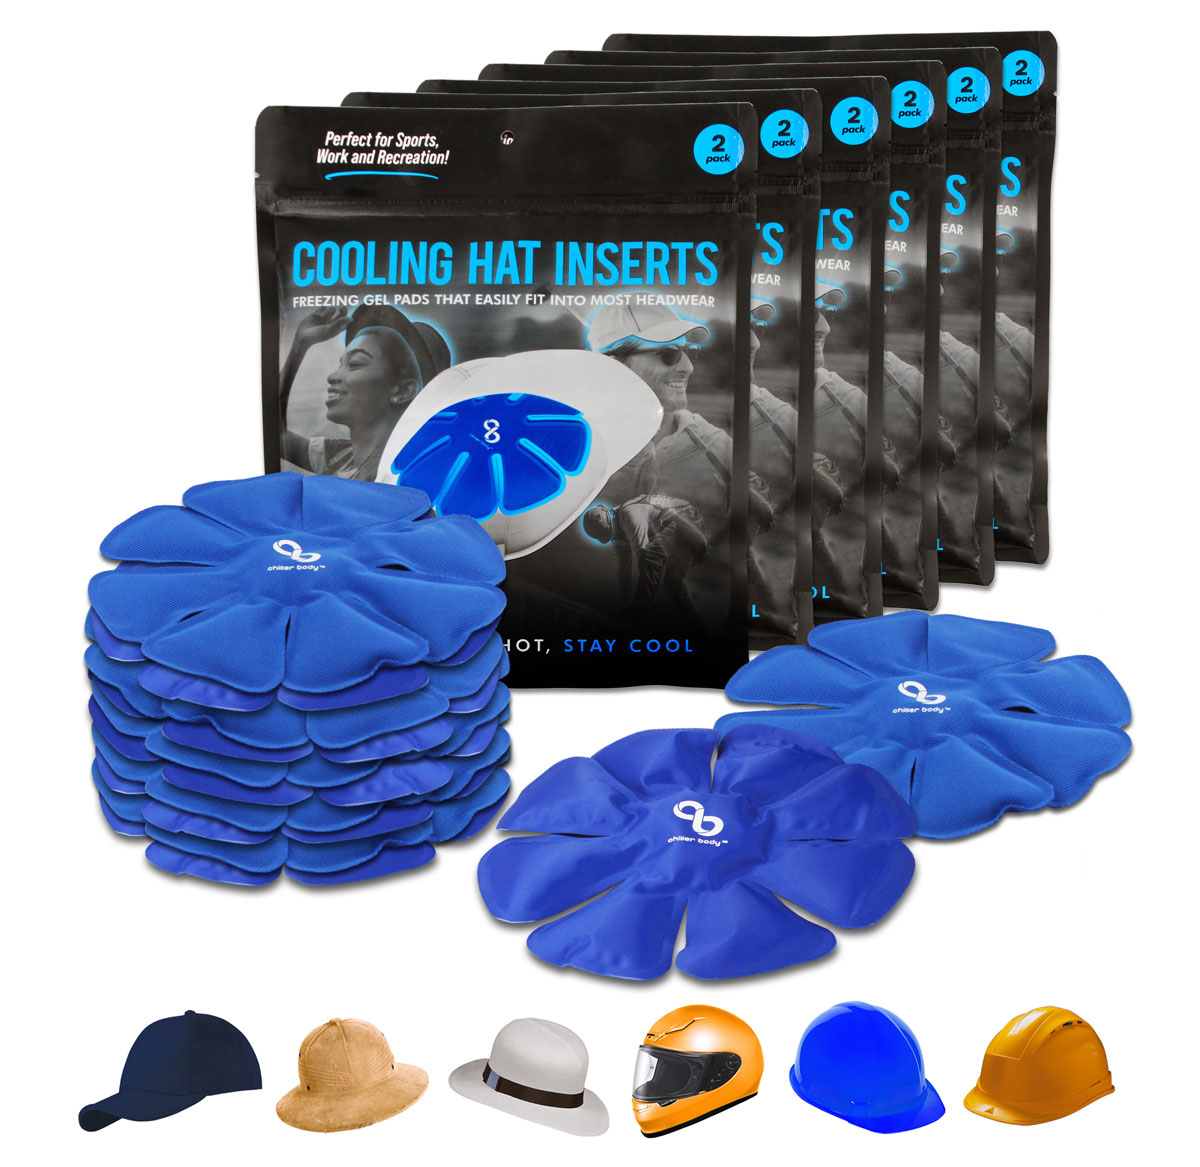 12-Pack Cooling Hat InsertsLong Lasting (cools 6 people all day, everyday)